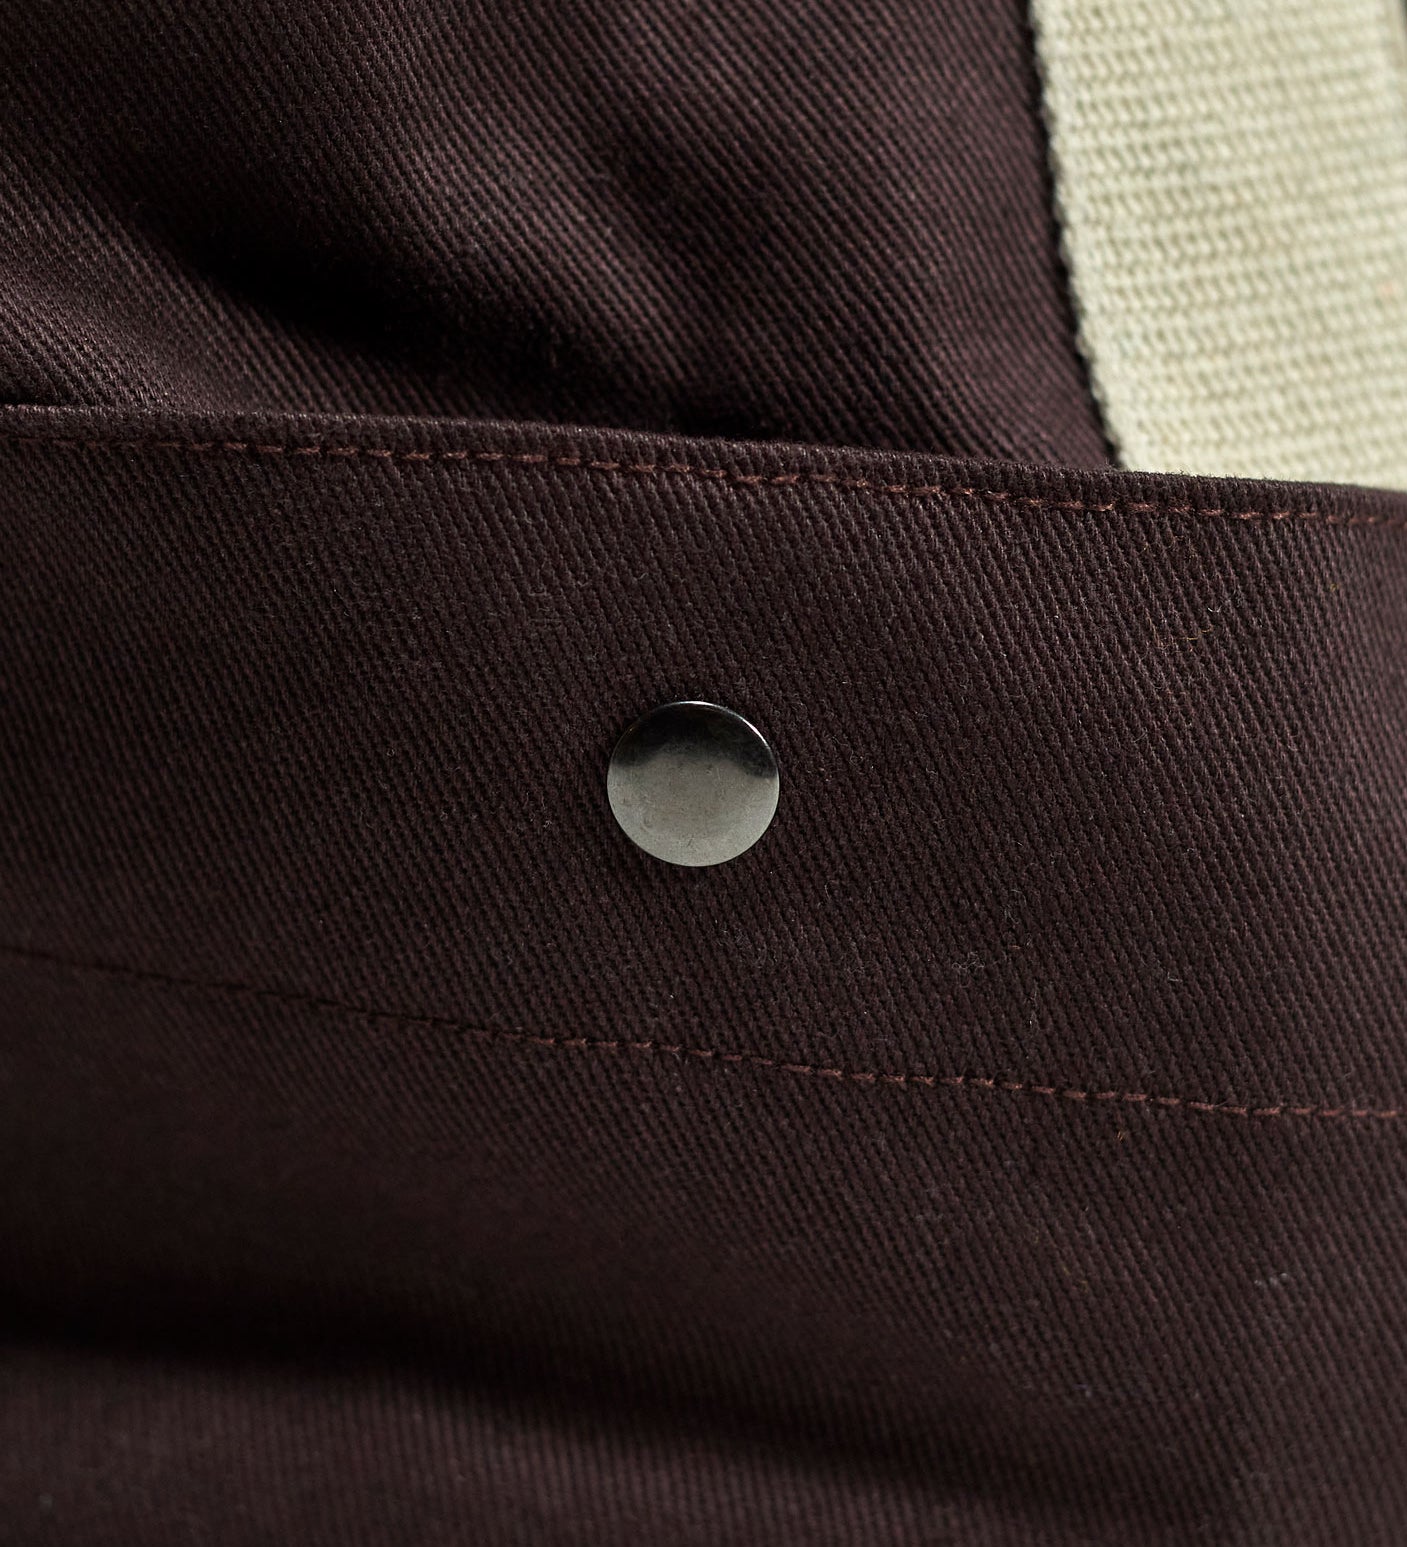 Press-stud fastenings to secure the spacious external pockets of the dark plum Uskees #0401 basin bag in cotton drill.